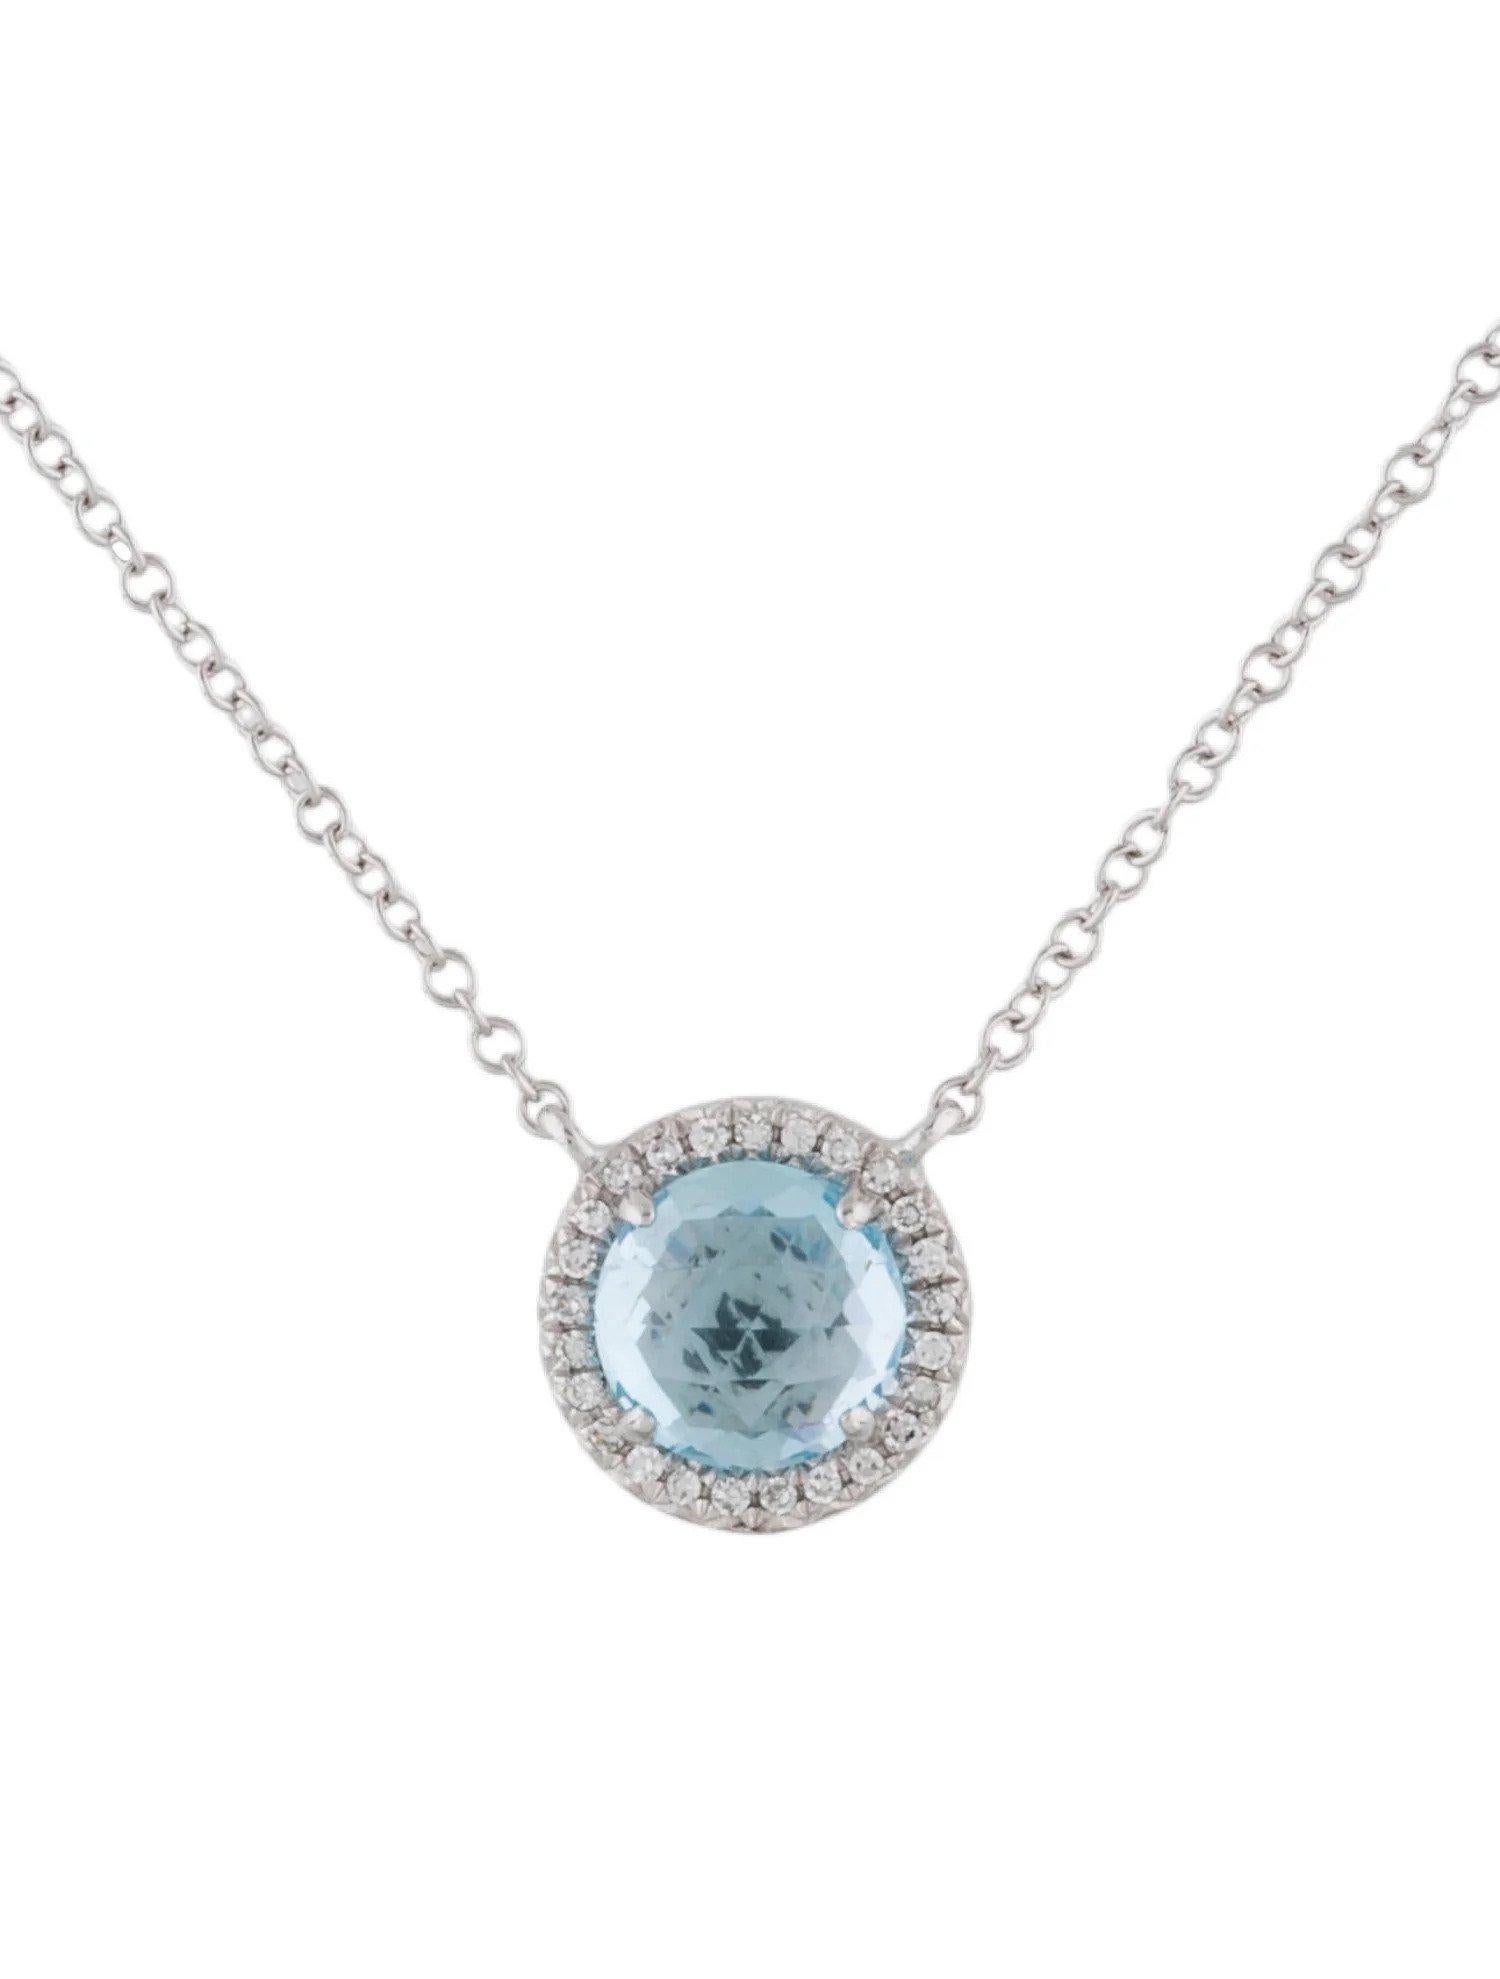 This Blue Topaz & Diamond Pendant is a stunning and timeless accessory that can add a touch of glamour and sophistication to any outfit. 

This pendant features a 1.41 Carat Round Blue Topaz, with a Diamond Halo comprised of 0.06 Carats of Single